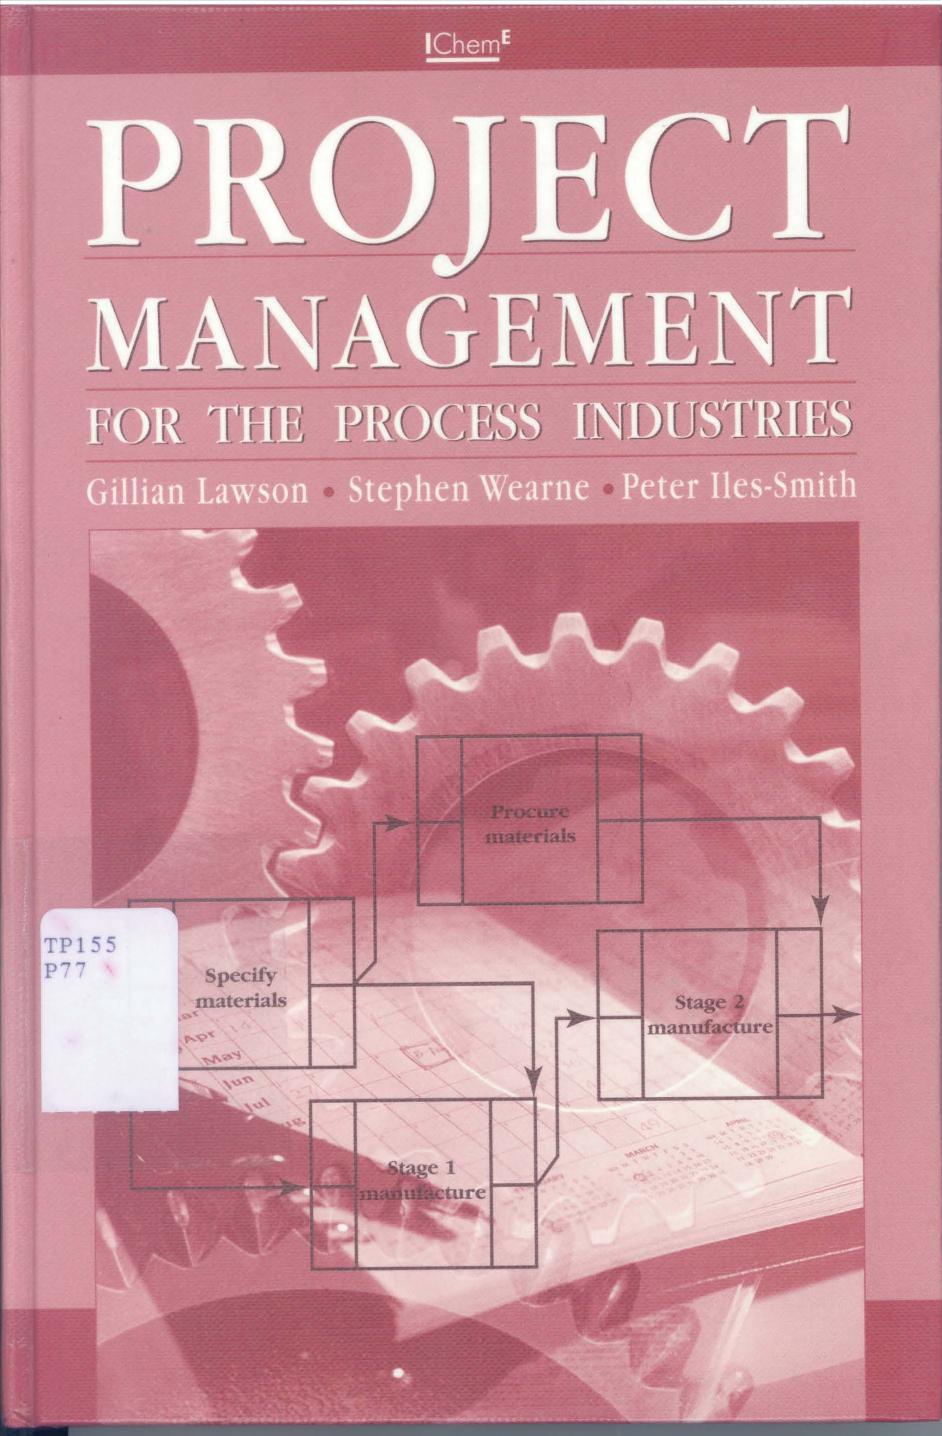 Project Management for the Process Industries